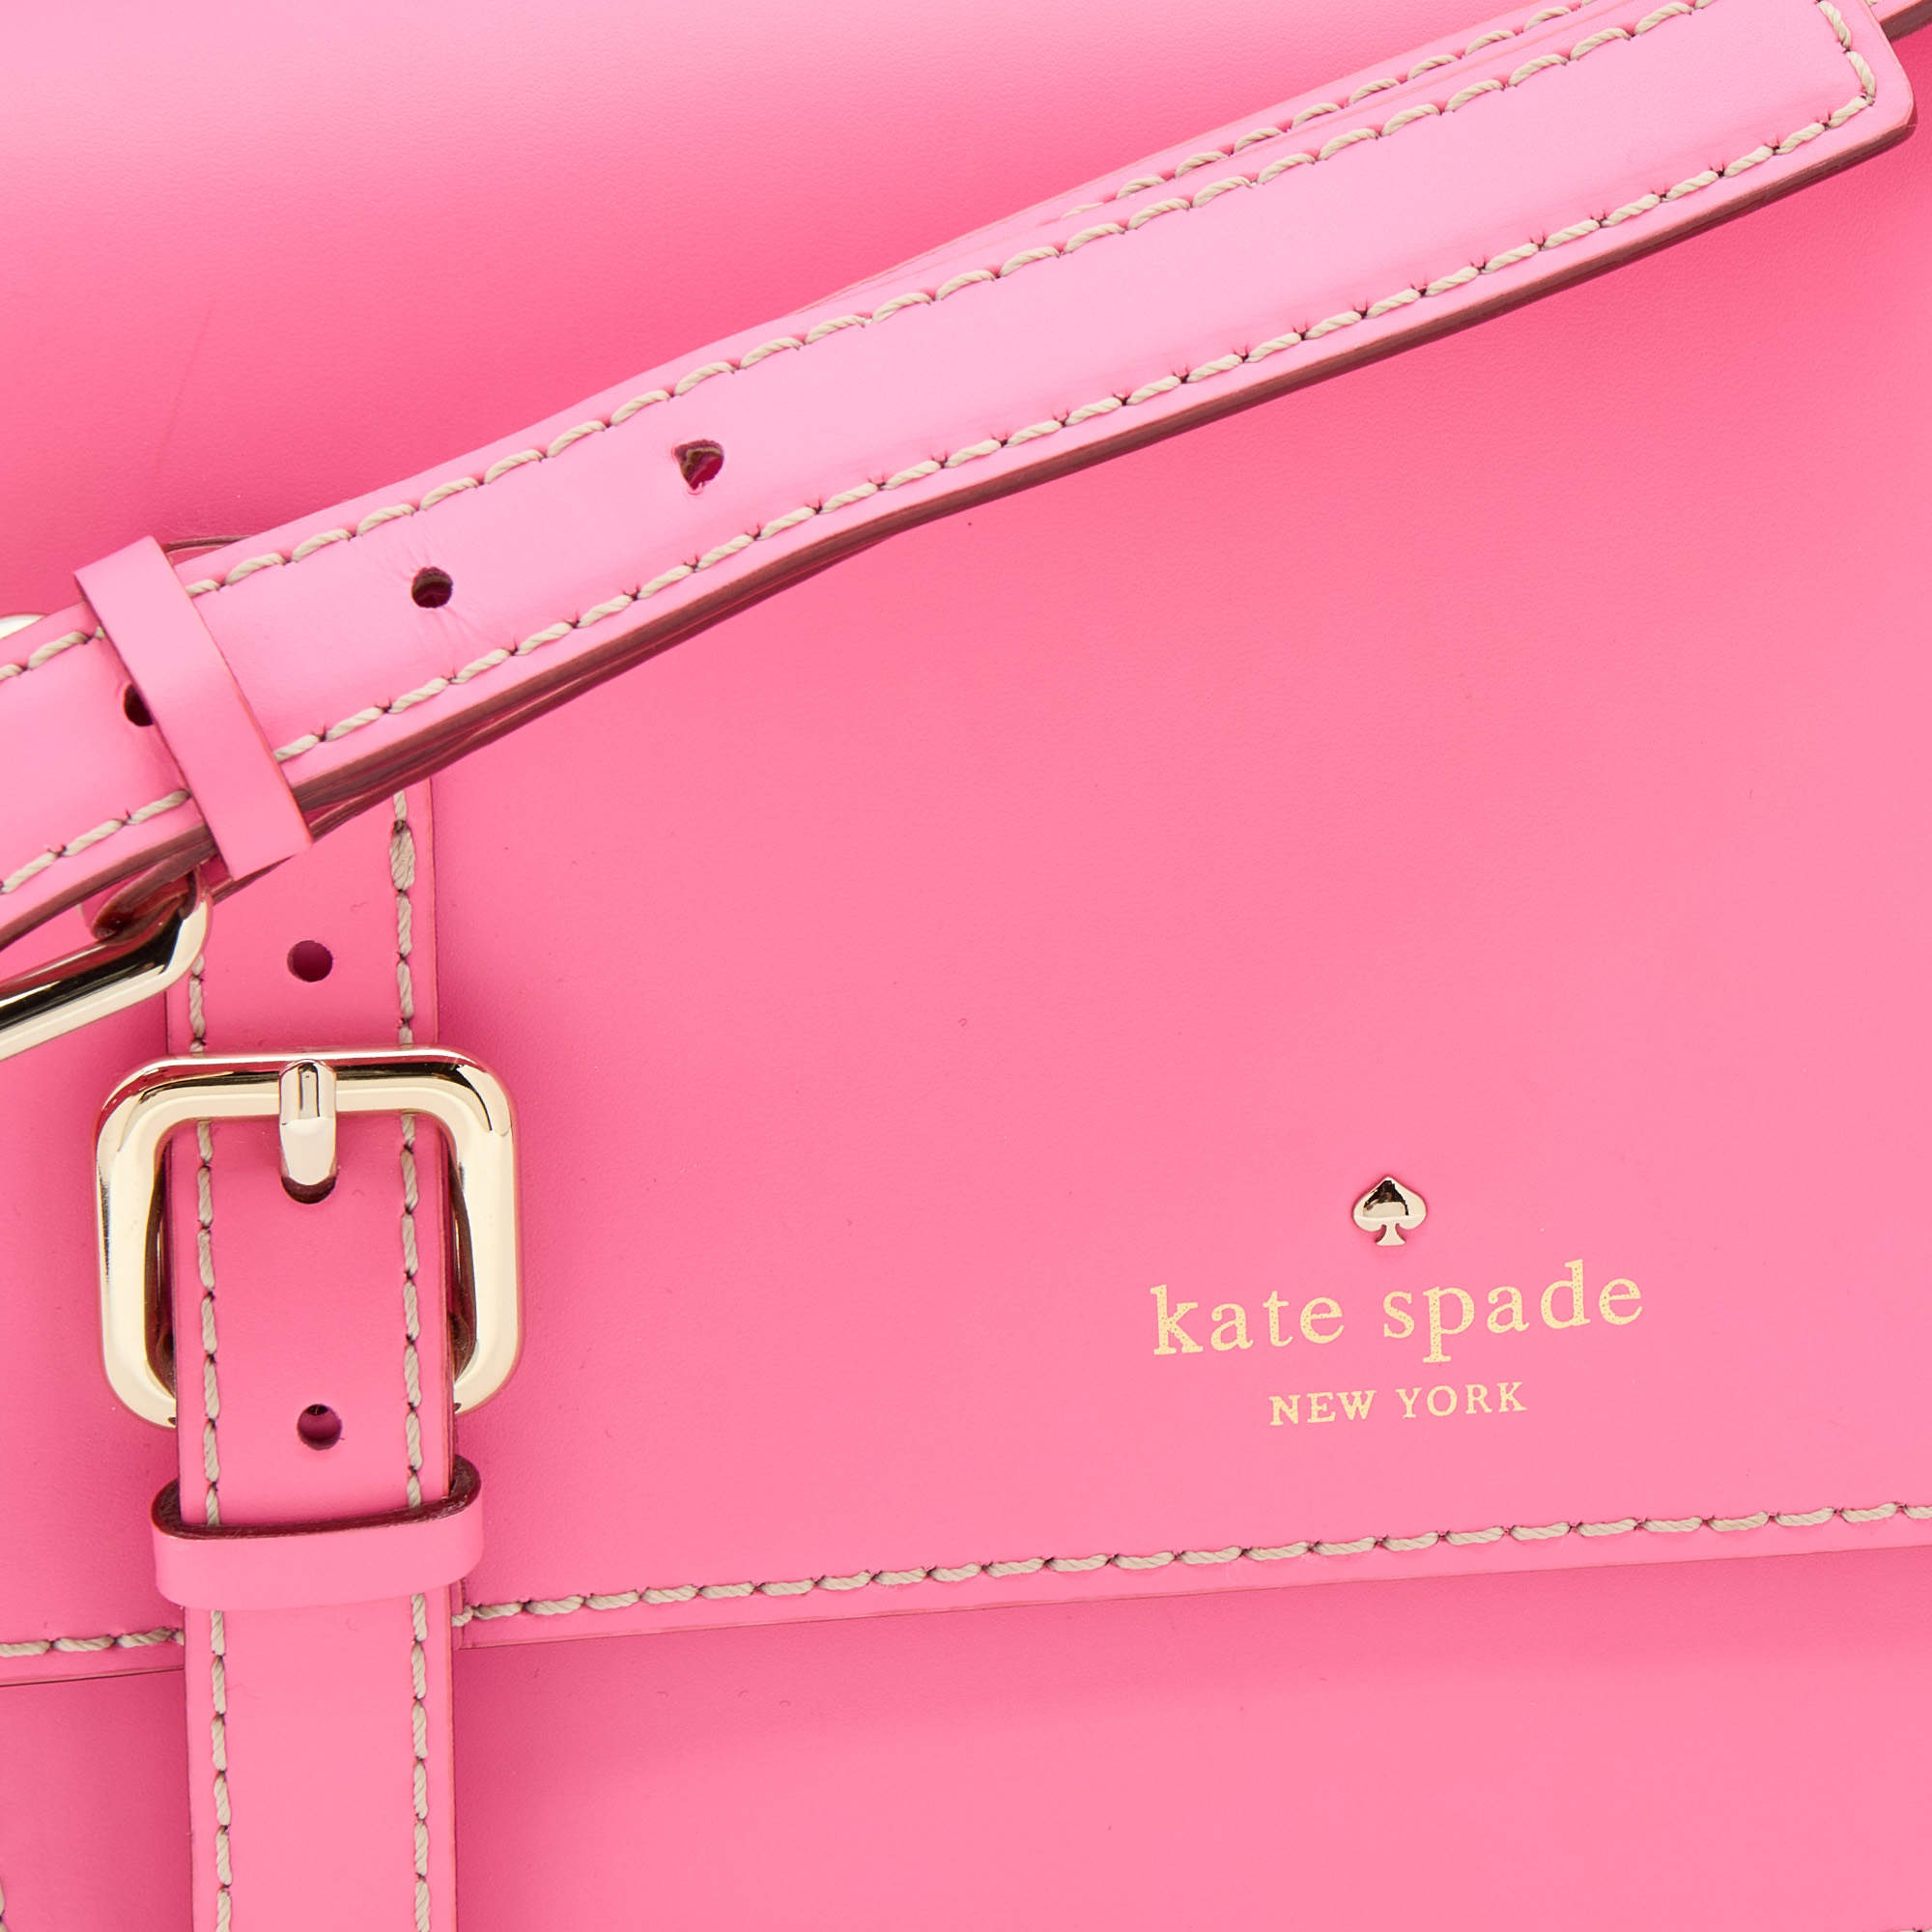 Kate Spade Pink Leather Essex Scout Crossbody Bag Kate Spade